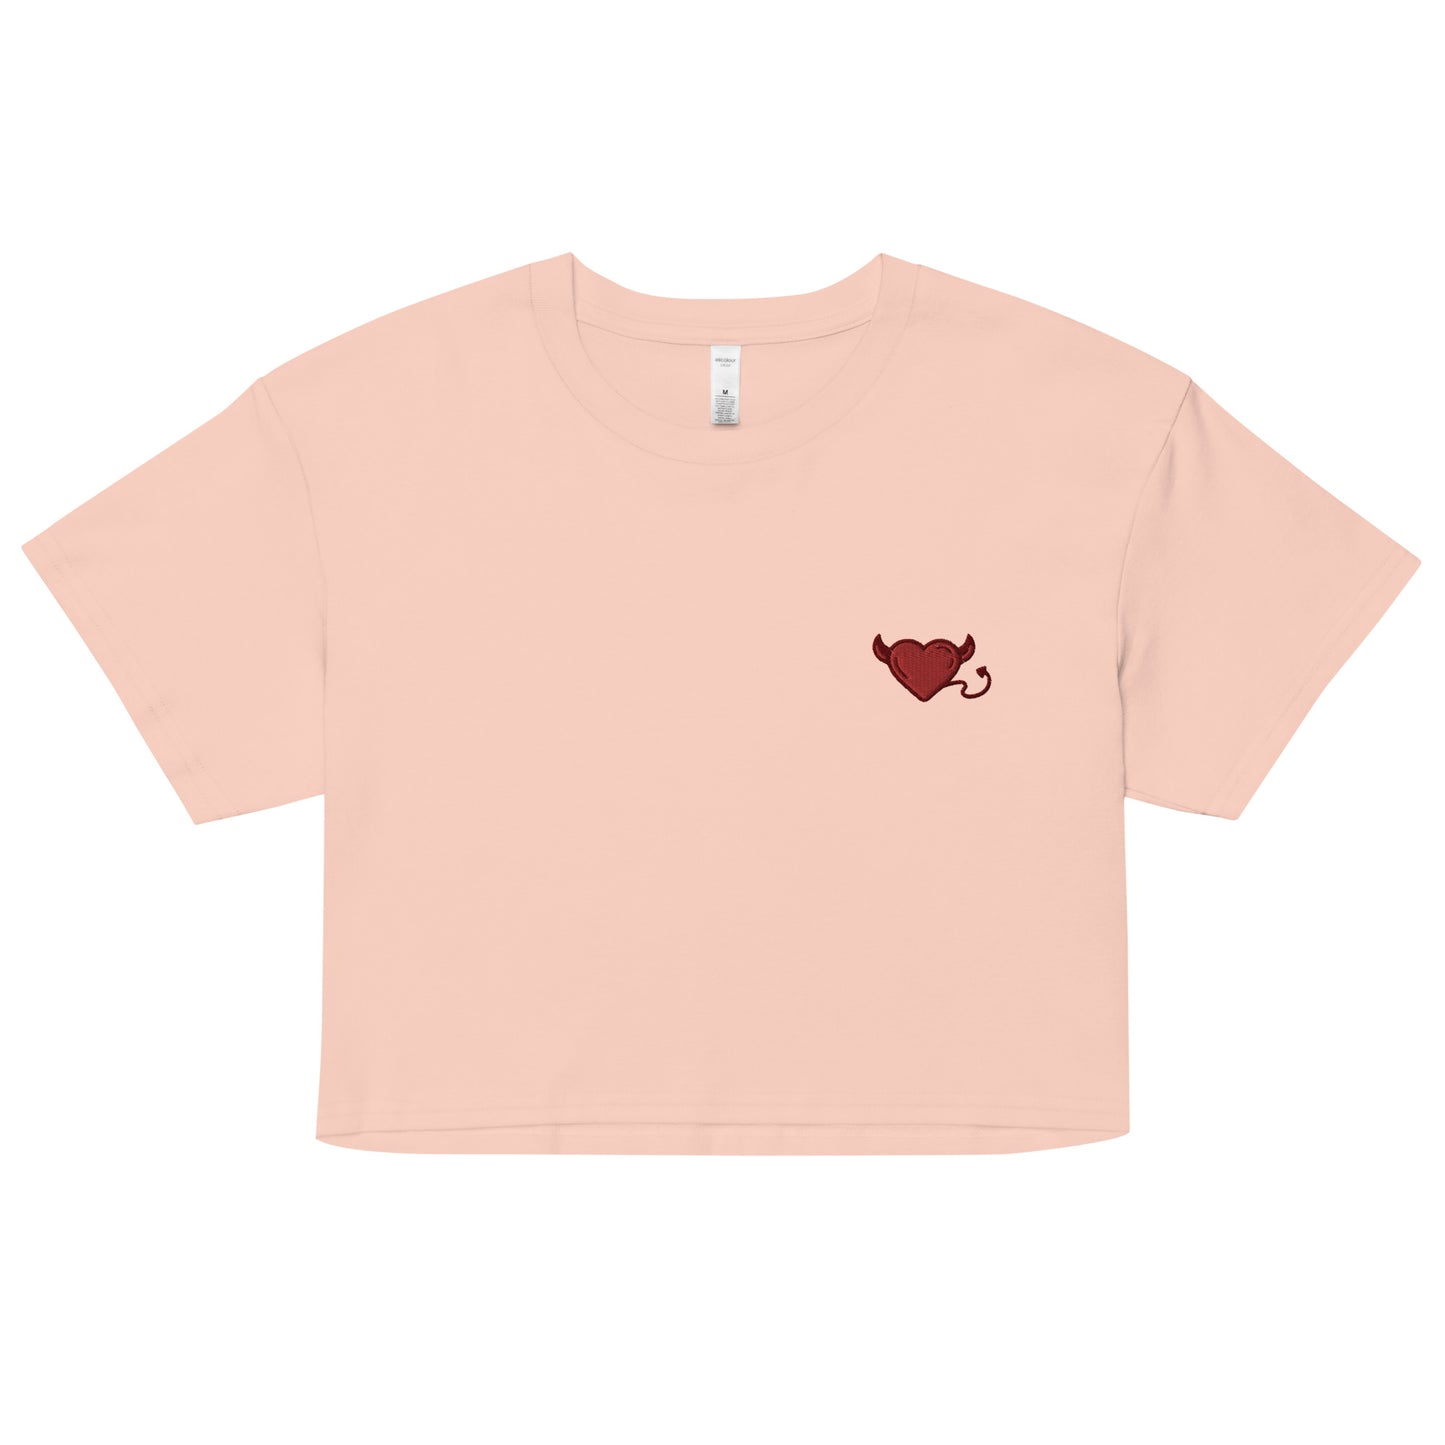 A relaxed, modest pale pink crop top features a subtle red embroidery featuring a devil's heart. Adding a touch of mischief to your look—a playful celebration of lgbtq culture! Made from 100% combed cotton. Available in Extra Small, Small, Medium, Large, Extra Large.